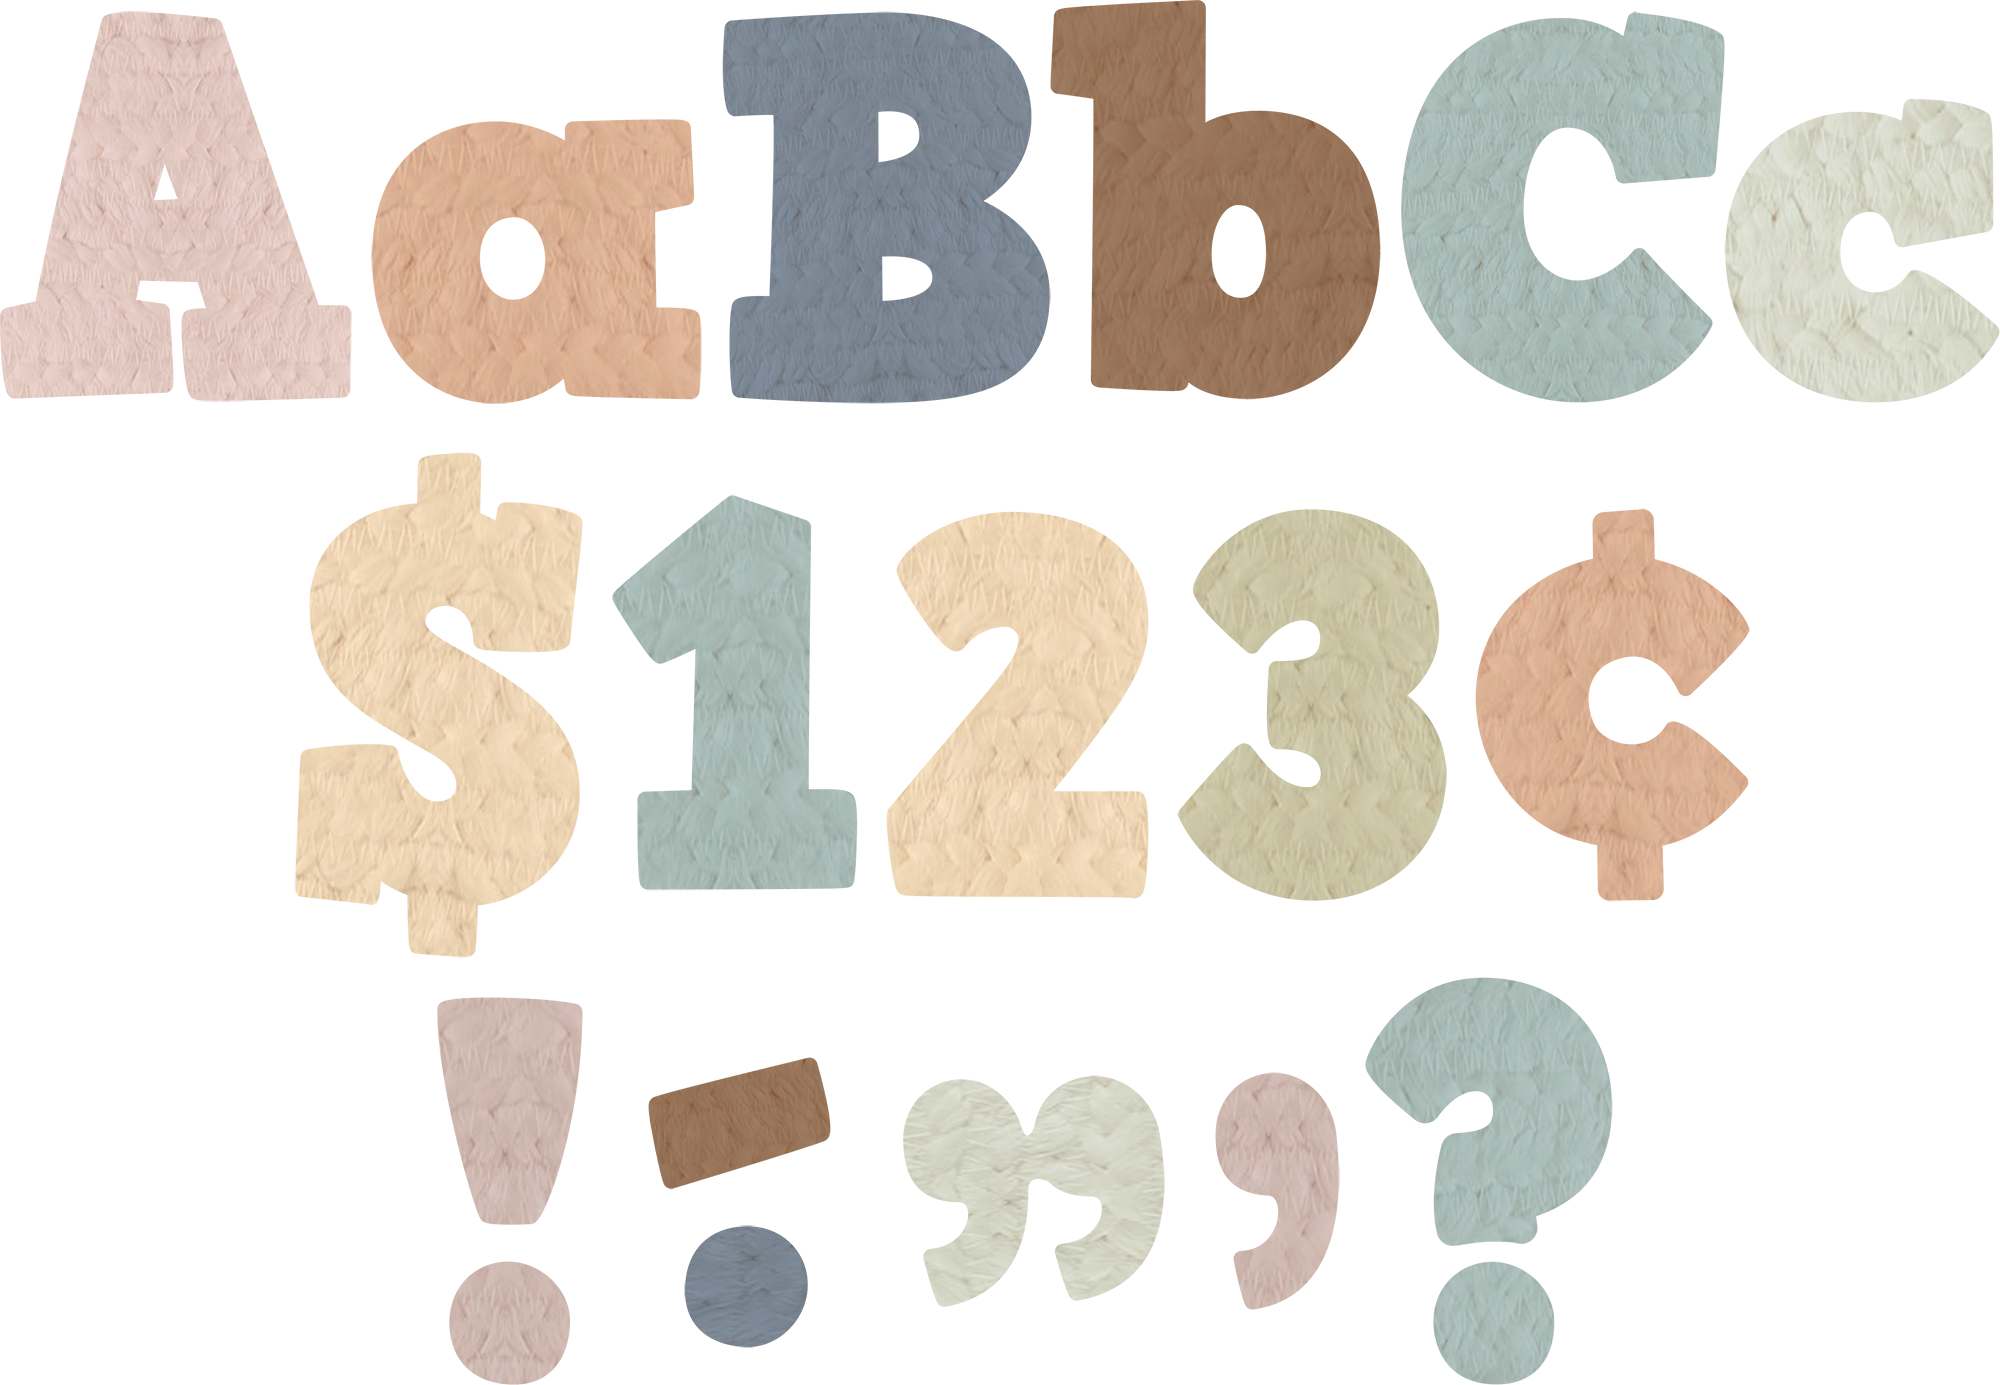 Each pack includes 230 total pieces: • 61 uppercase letters • 95 lowercase letters • 20 numbers 0 to 9 • 40 punctuation marks • 14 Spanish accent marks